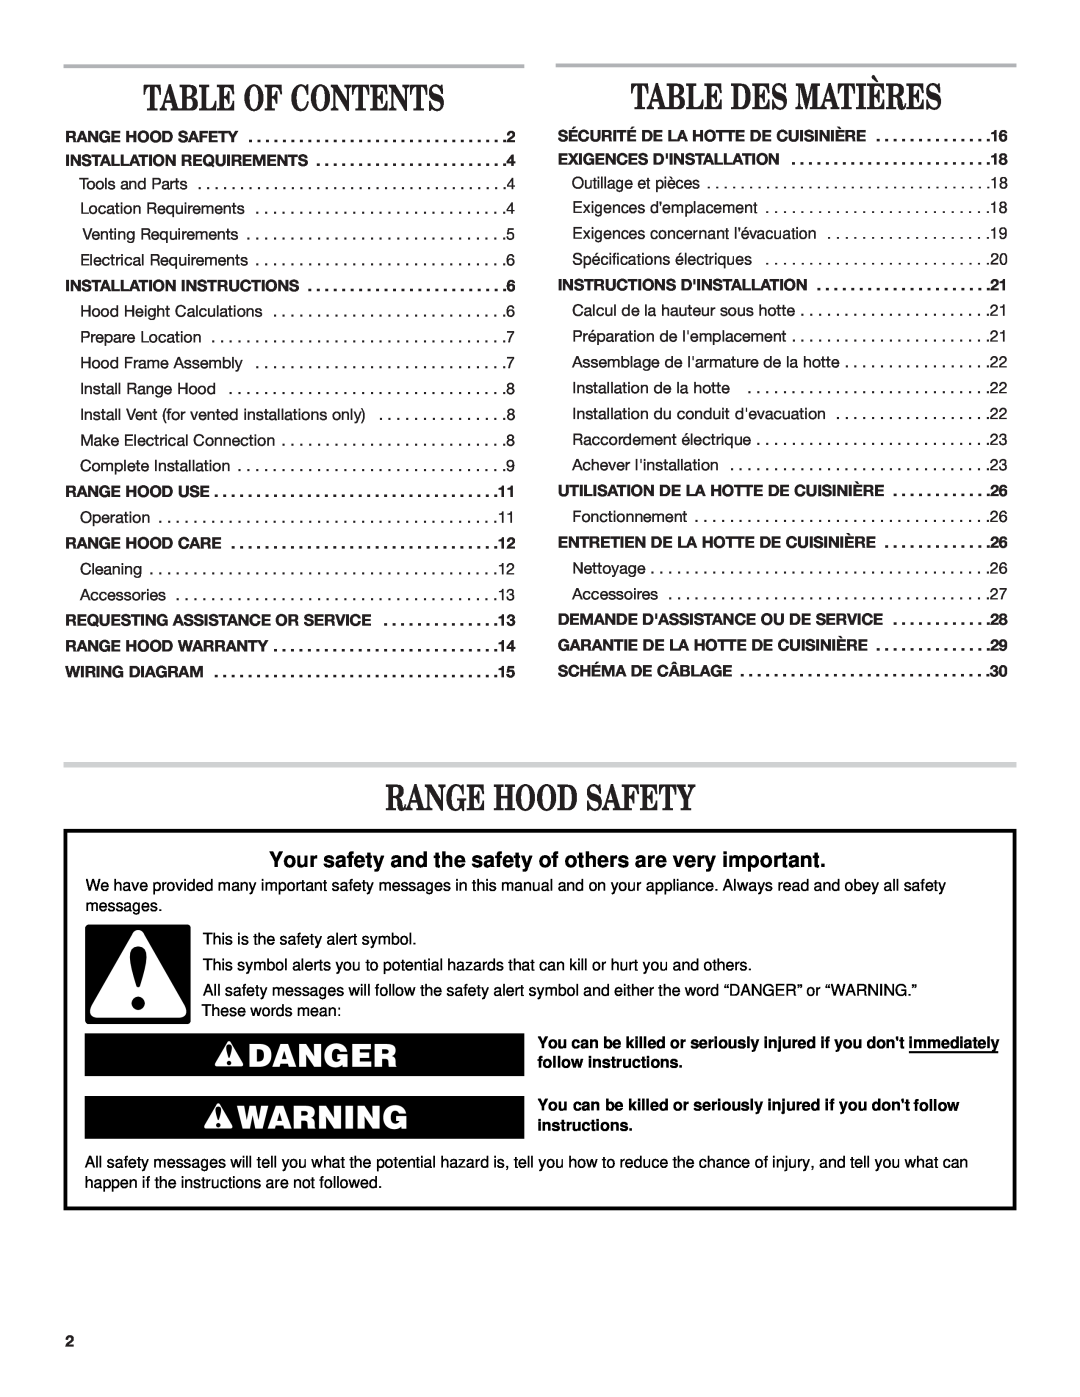 Whirlpool Ventilation Hood Table Of Contents, Table Des Matières, Range Hood Safety, Danger, Installation Instructions 